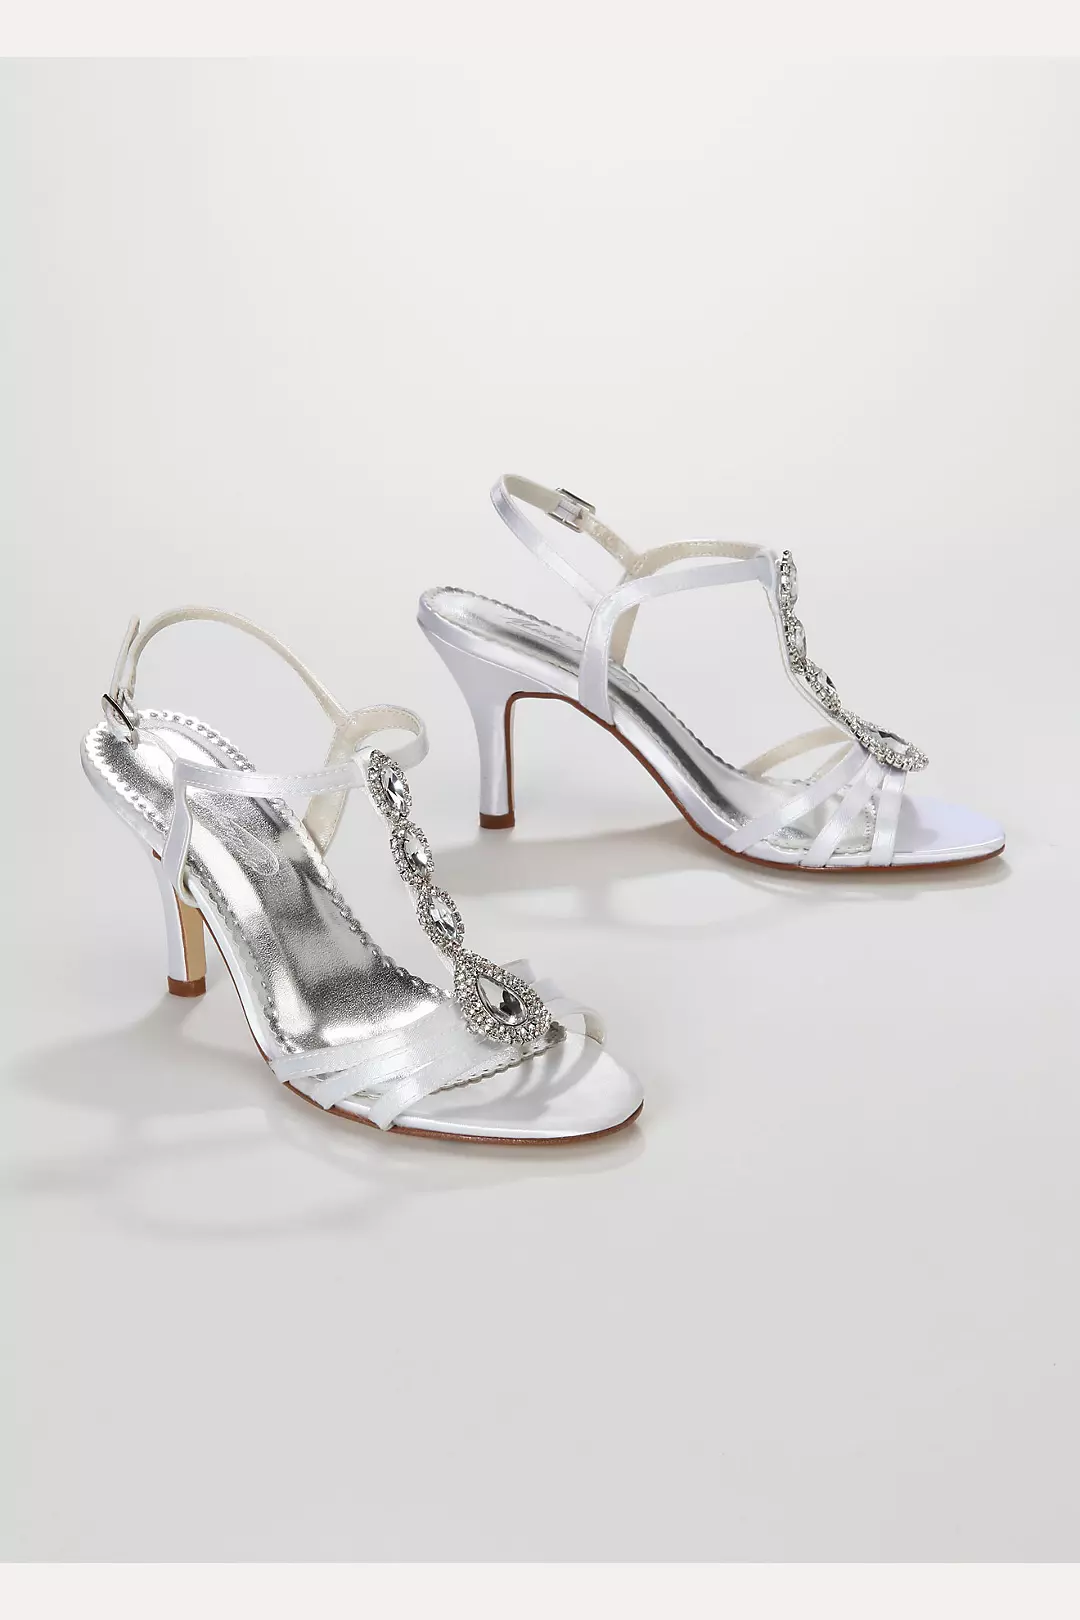 T-Strap High Heel Sandal with Jewel Detail Image